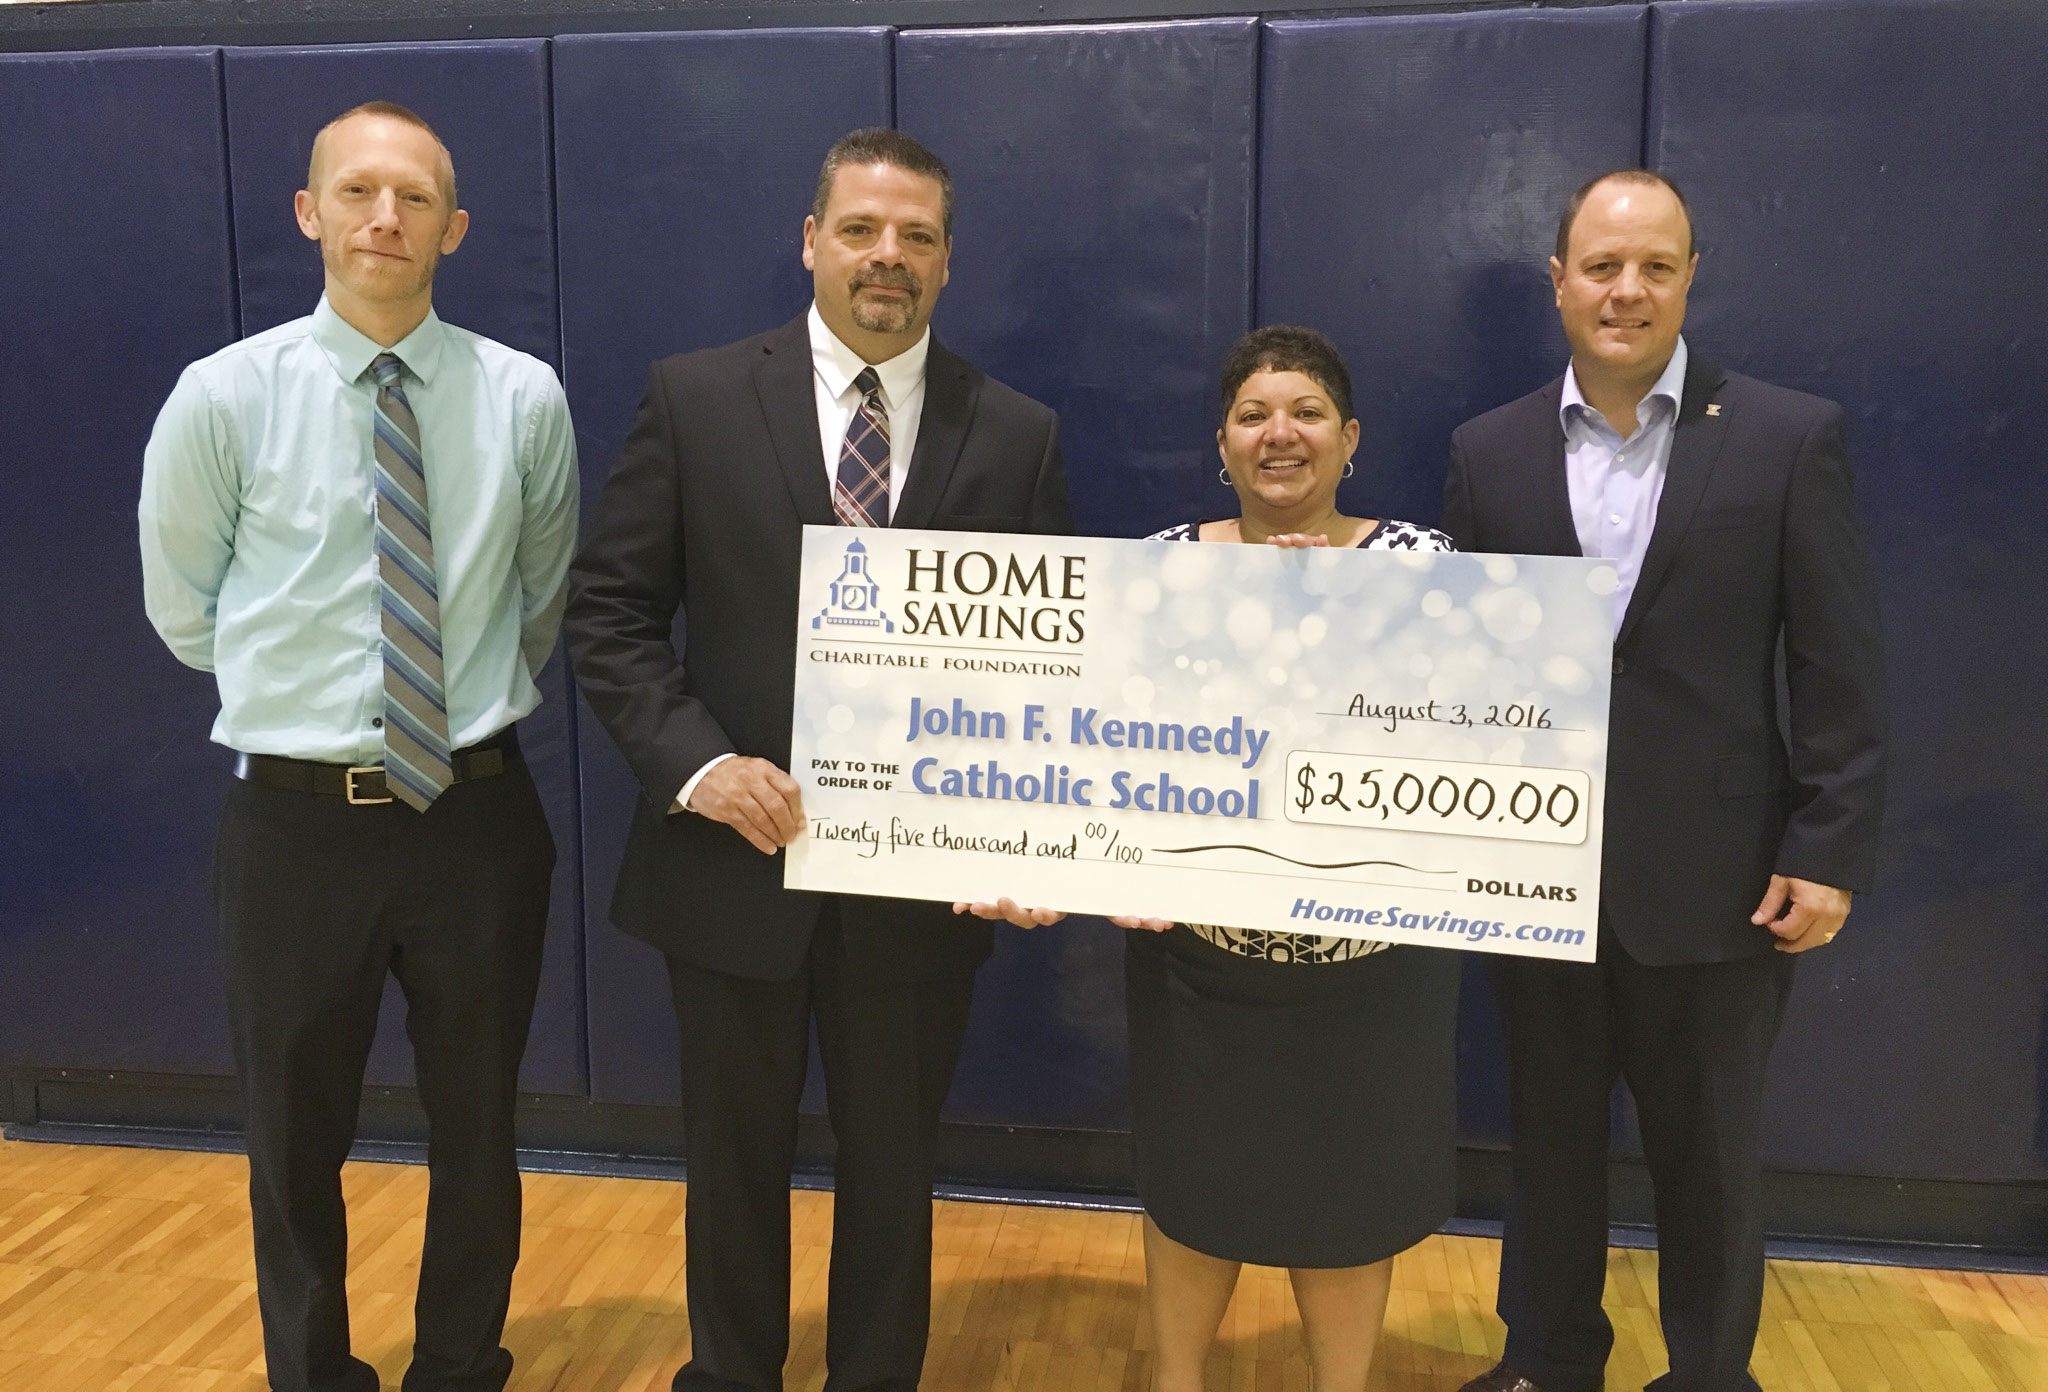 SPECIAL TO THE VINDICATOR
John F. Kennedy Catholic School recently received a donation of $25,000 from Home Savings Charitable Foundation. The school plans to upgrade the boiler system, windows and lighting to generate energy savings. From left, are Mark Komlanc, head basketball coach of JFK, Joseph Kenneally, president of JFK; Nancy Tabor, Trumbull County area manager of Home Savings; and Chris Litton, director of advancement and alumni relations at JFK. For information about the school, call 330-369-1804 or visit warrenjfk.com.